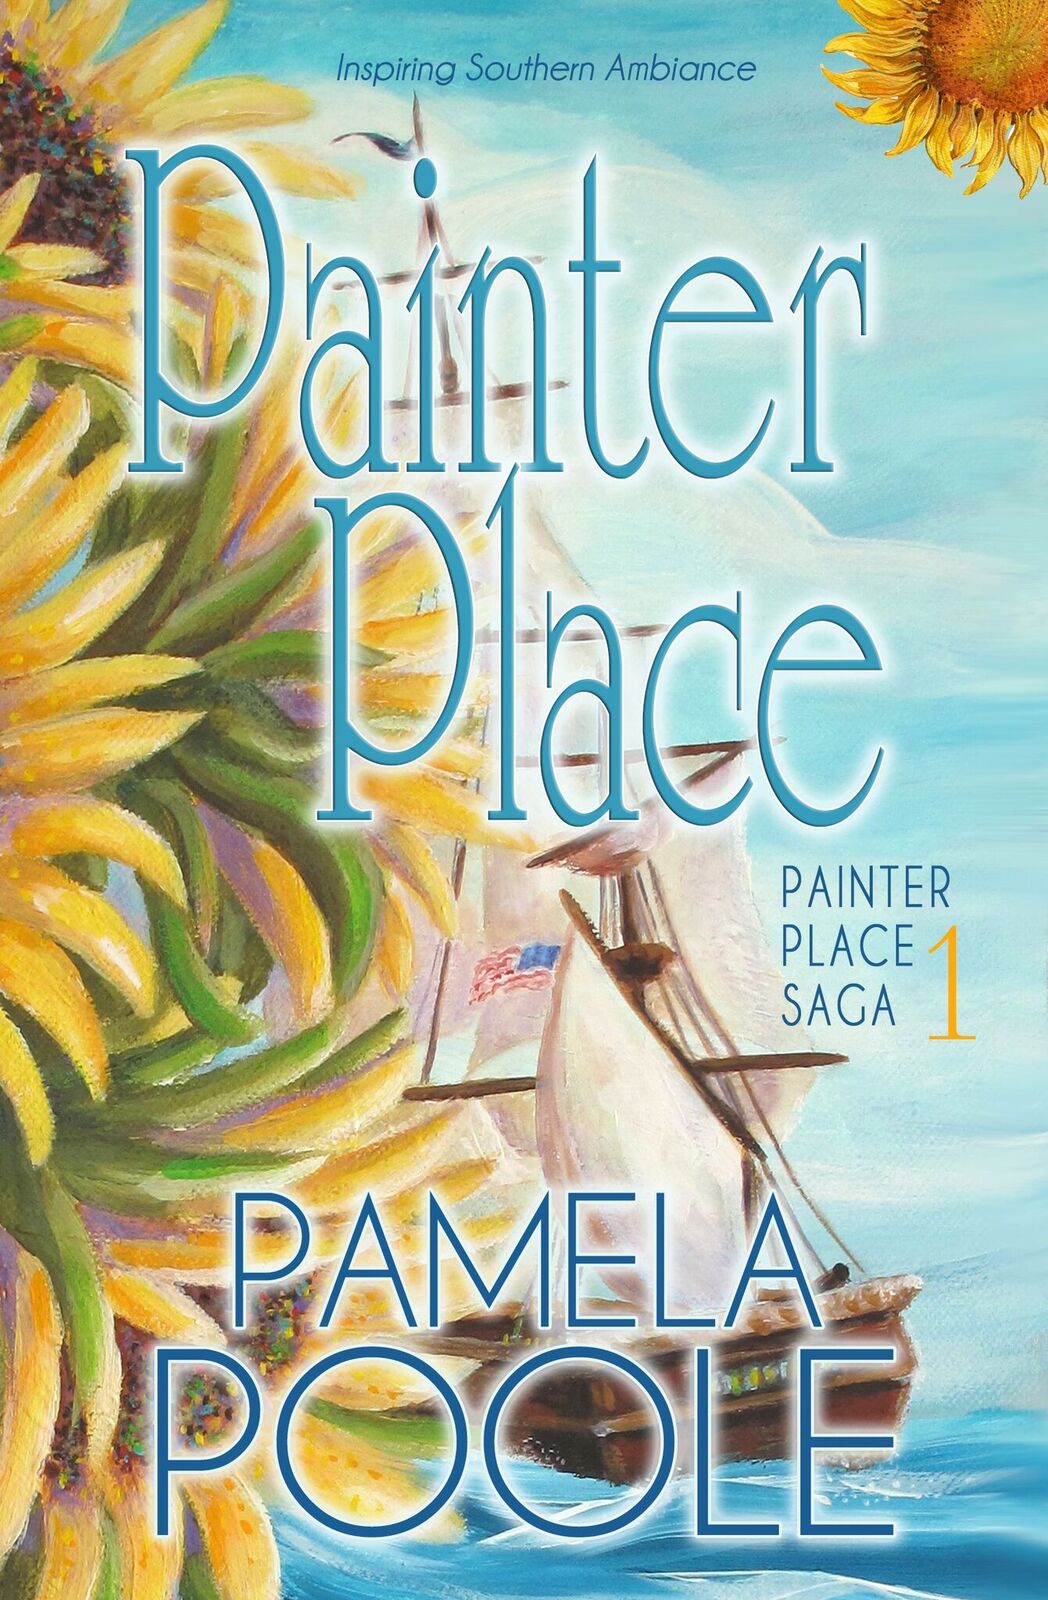 The Painter Place